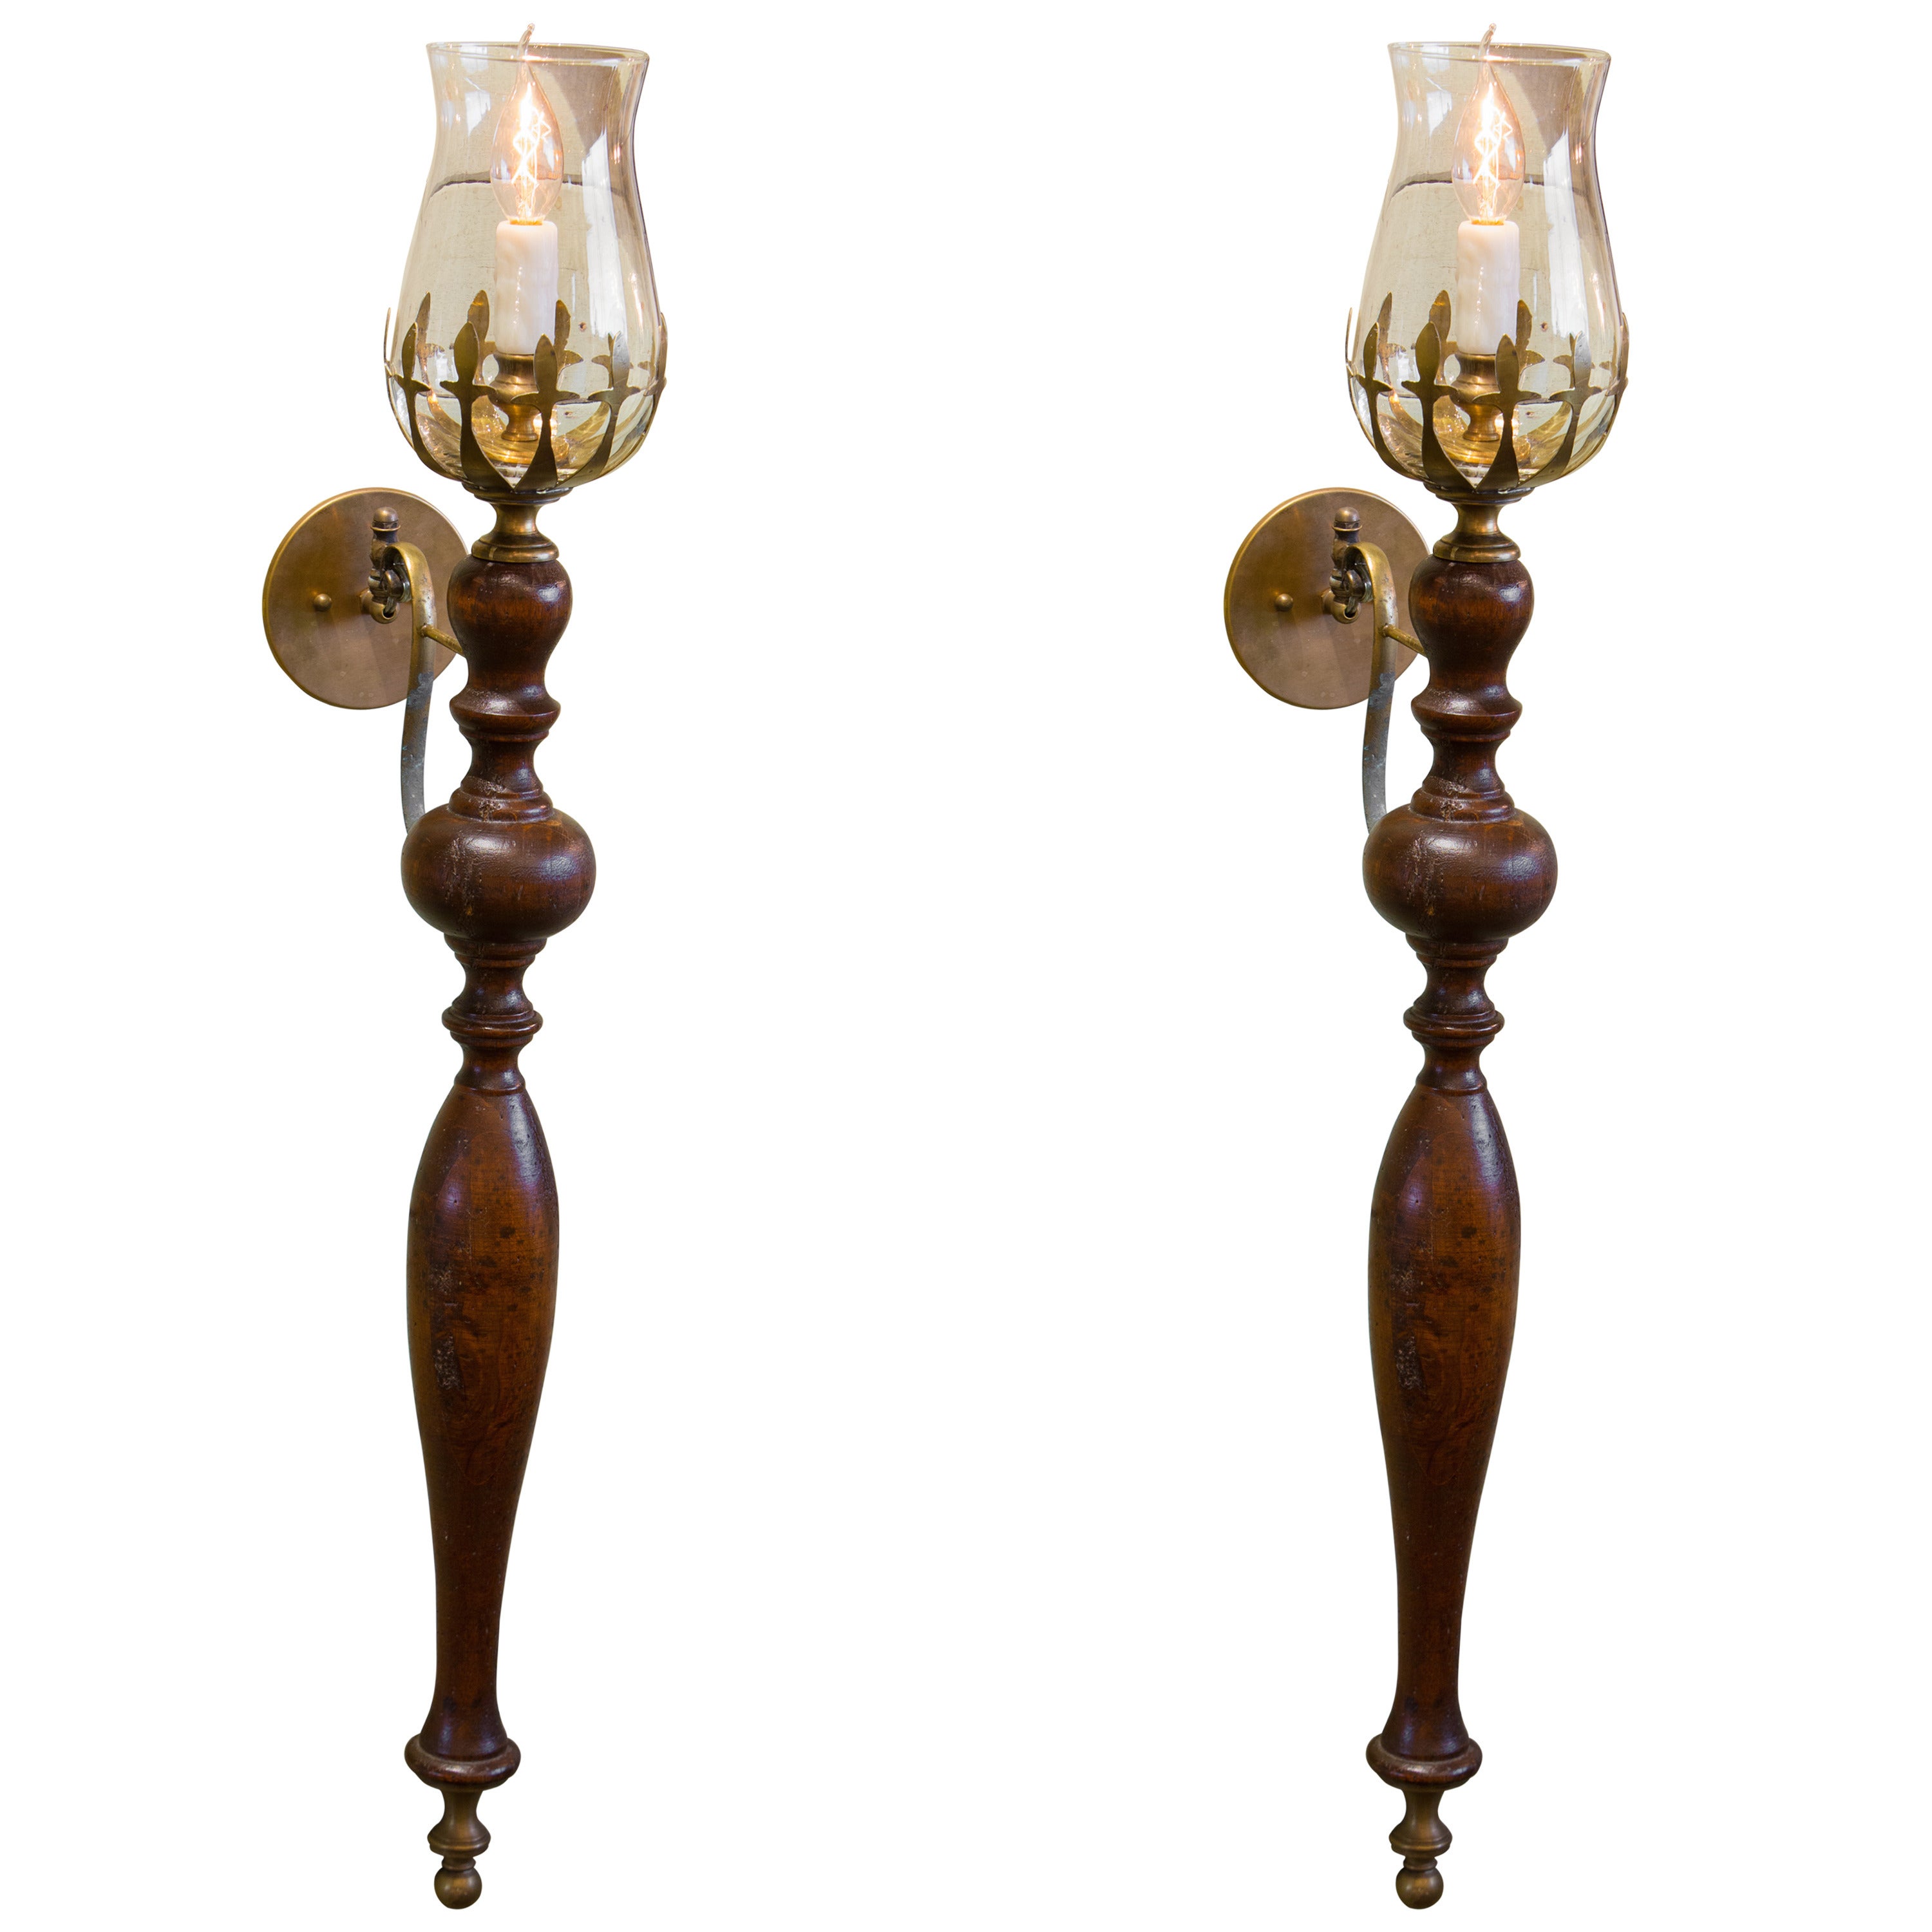 Pair of Vintage Italian Wood and Brass Sconces with Hurricanes